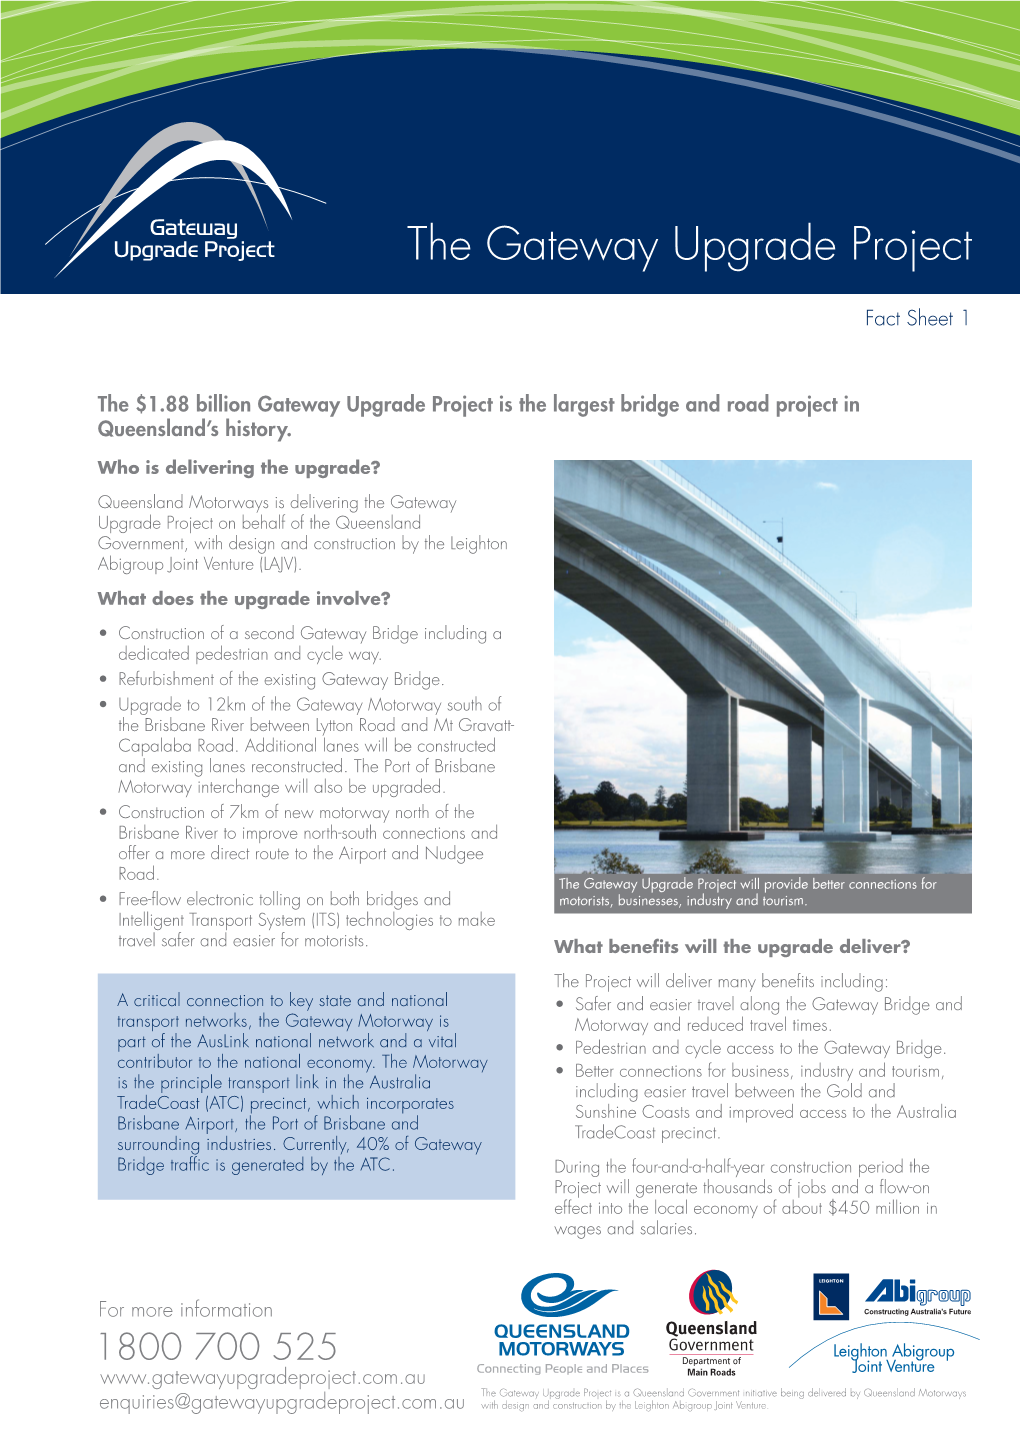 The Gateway Upgrade Project